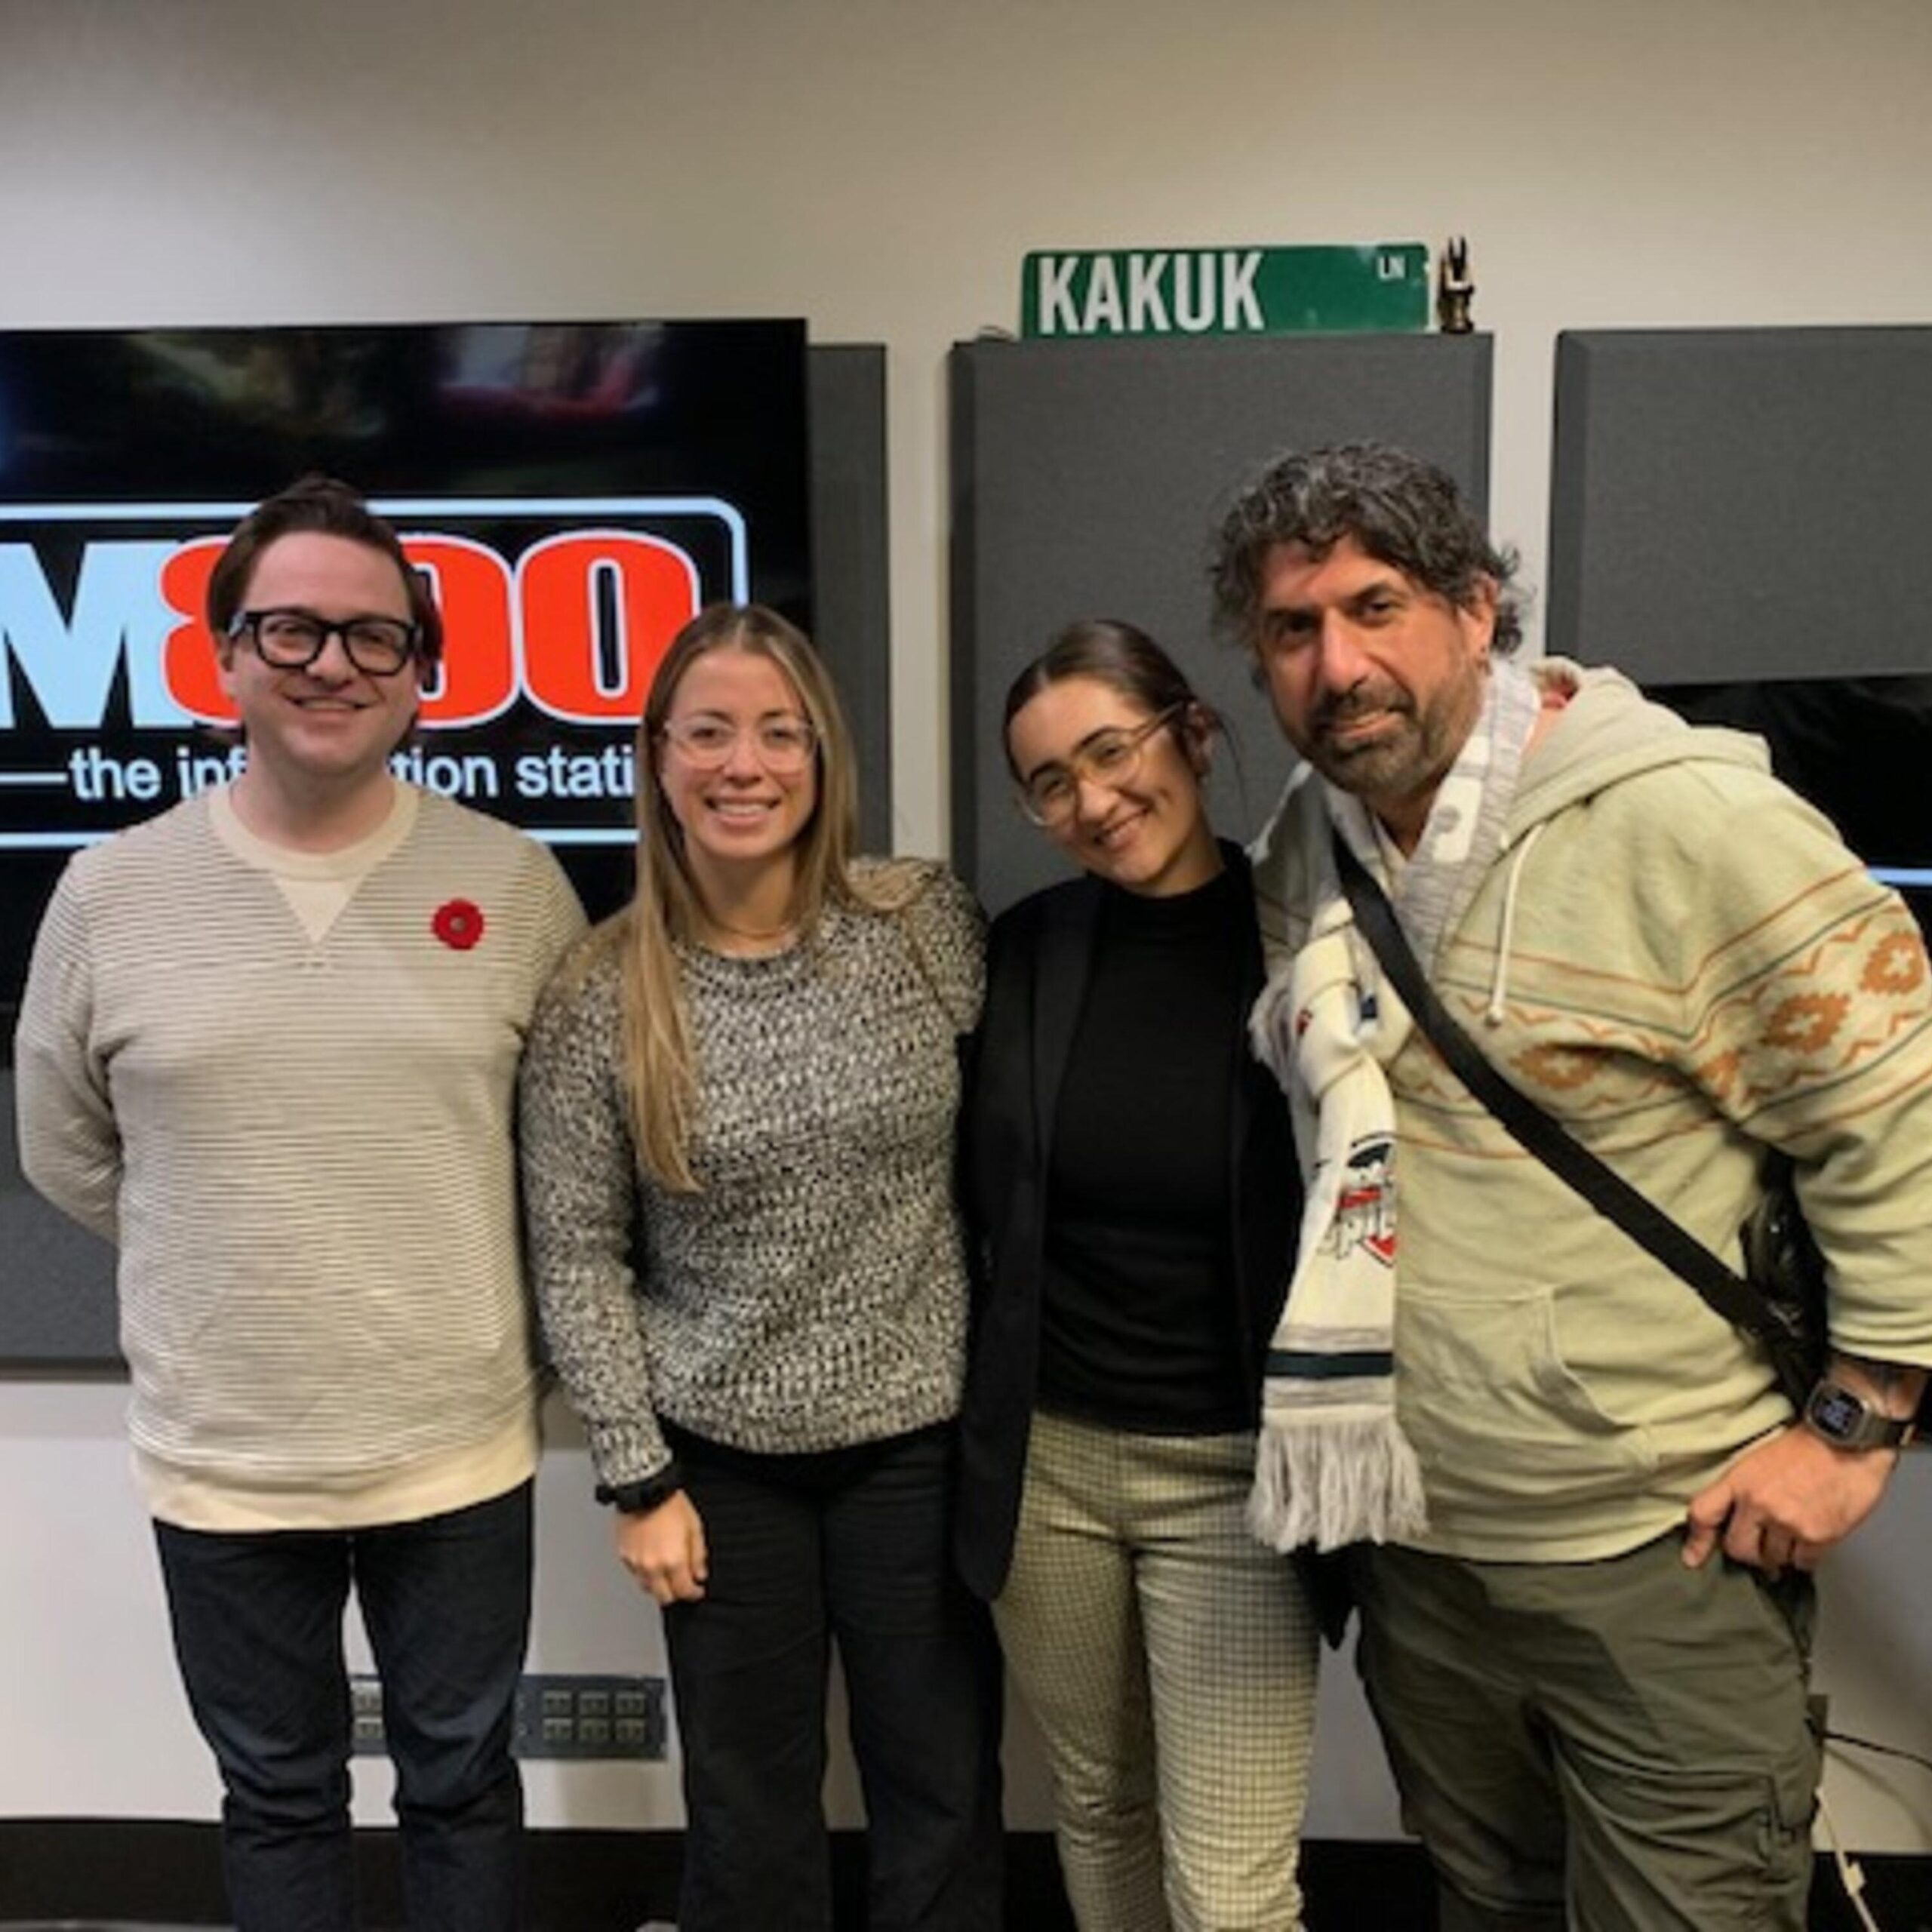 Ward 3 councillor Renaldo Agostino, Student Safety & Wellness Administrator at St. Clair College Alexandra Wiseman, and Jada Malott join AM800 CKLW's Jon Liedtke on The Dan MacDonald Show for the Friday Roundtable